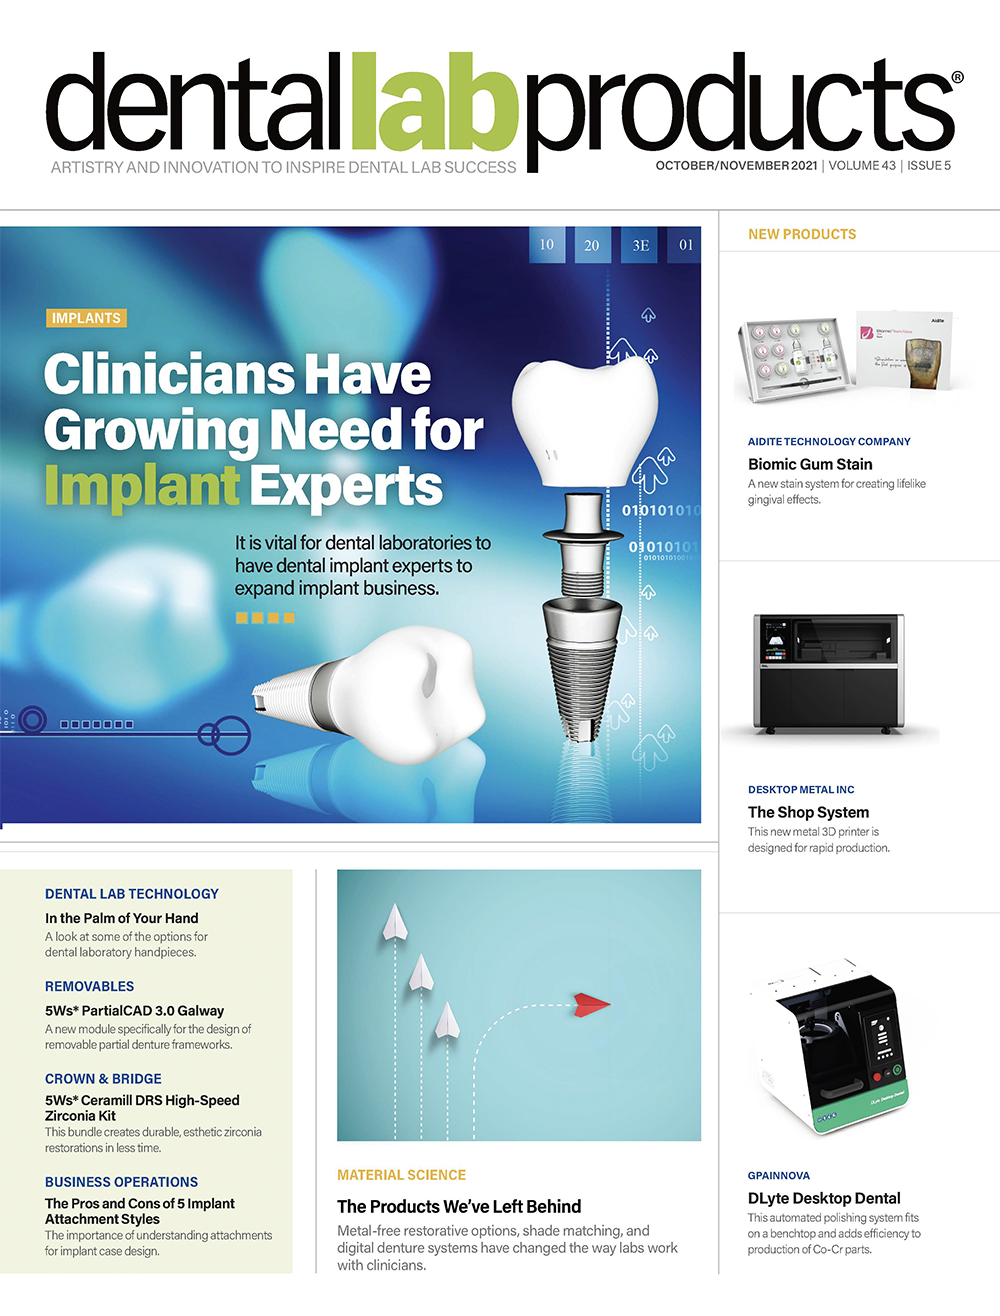 Dental Lab Products October/November 2021 issue cover